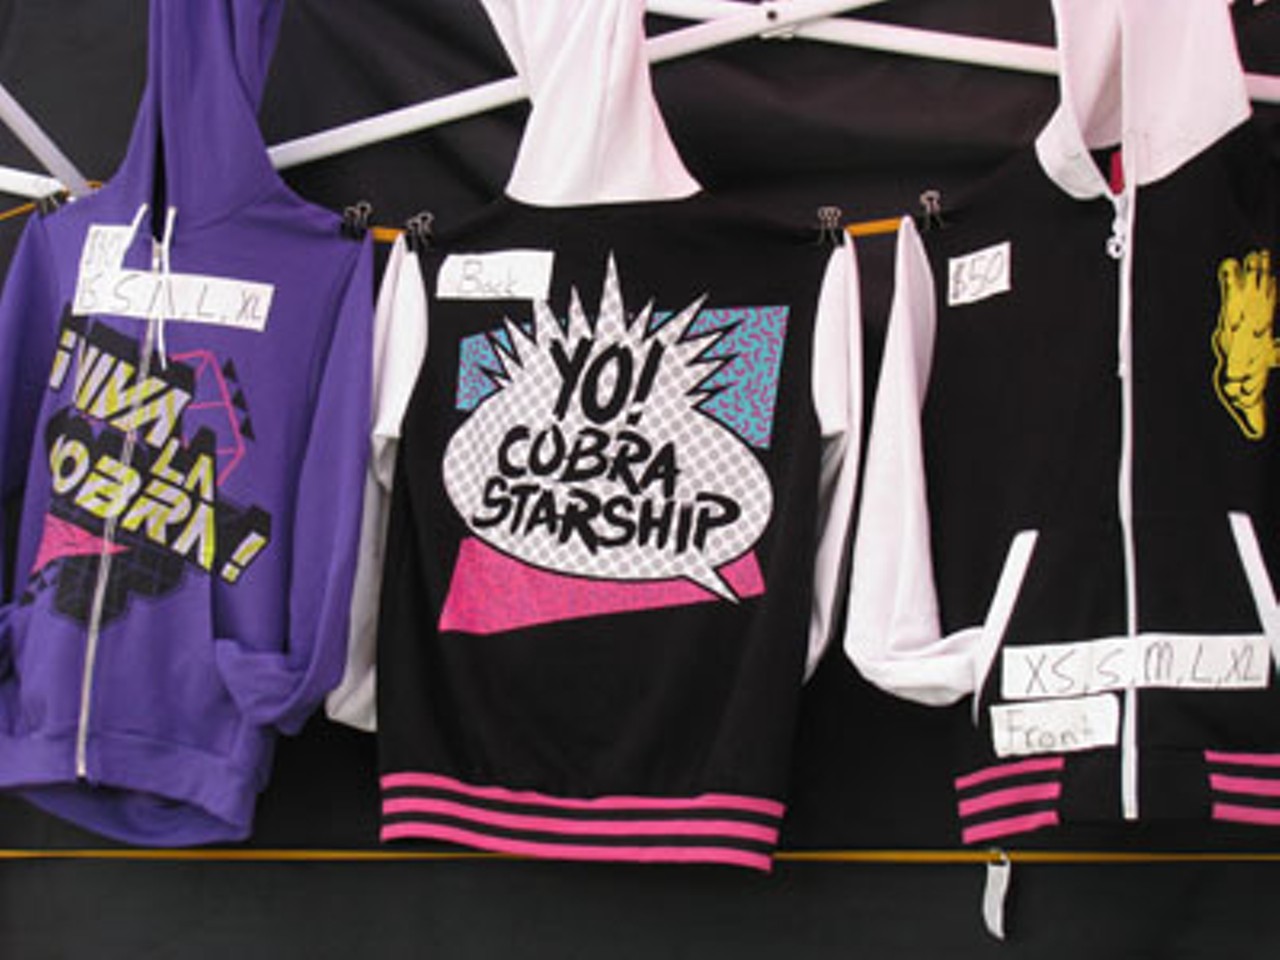 Cobra Starship merch. Nearly every band had their own table with tent advertising their name and selling wares. Only if Ed Lover and Dr. Dre could see these, they would give the boys in Cobra Starship props.